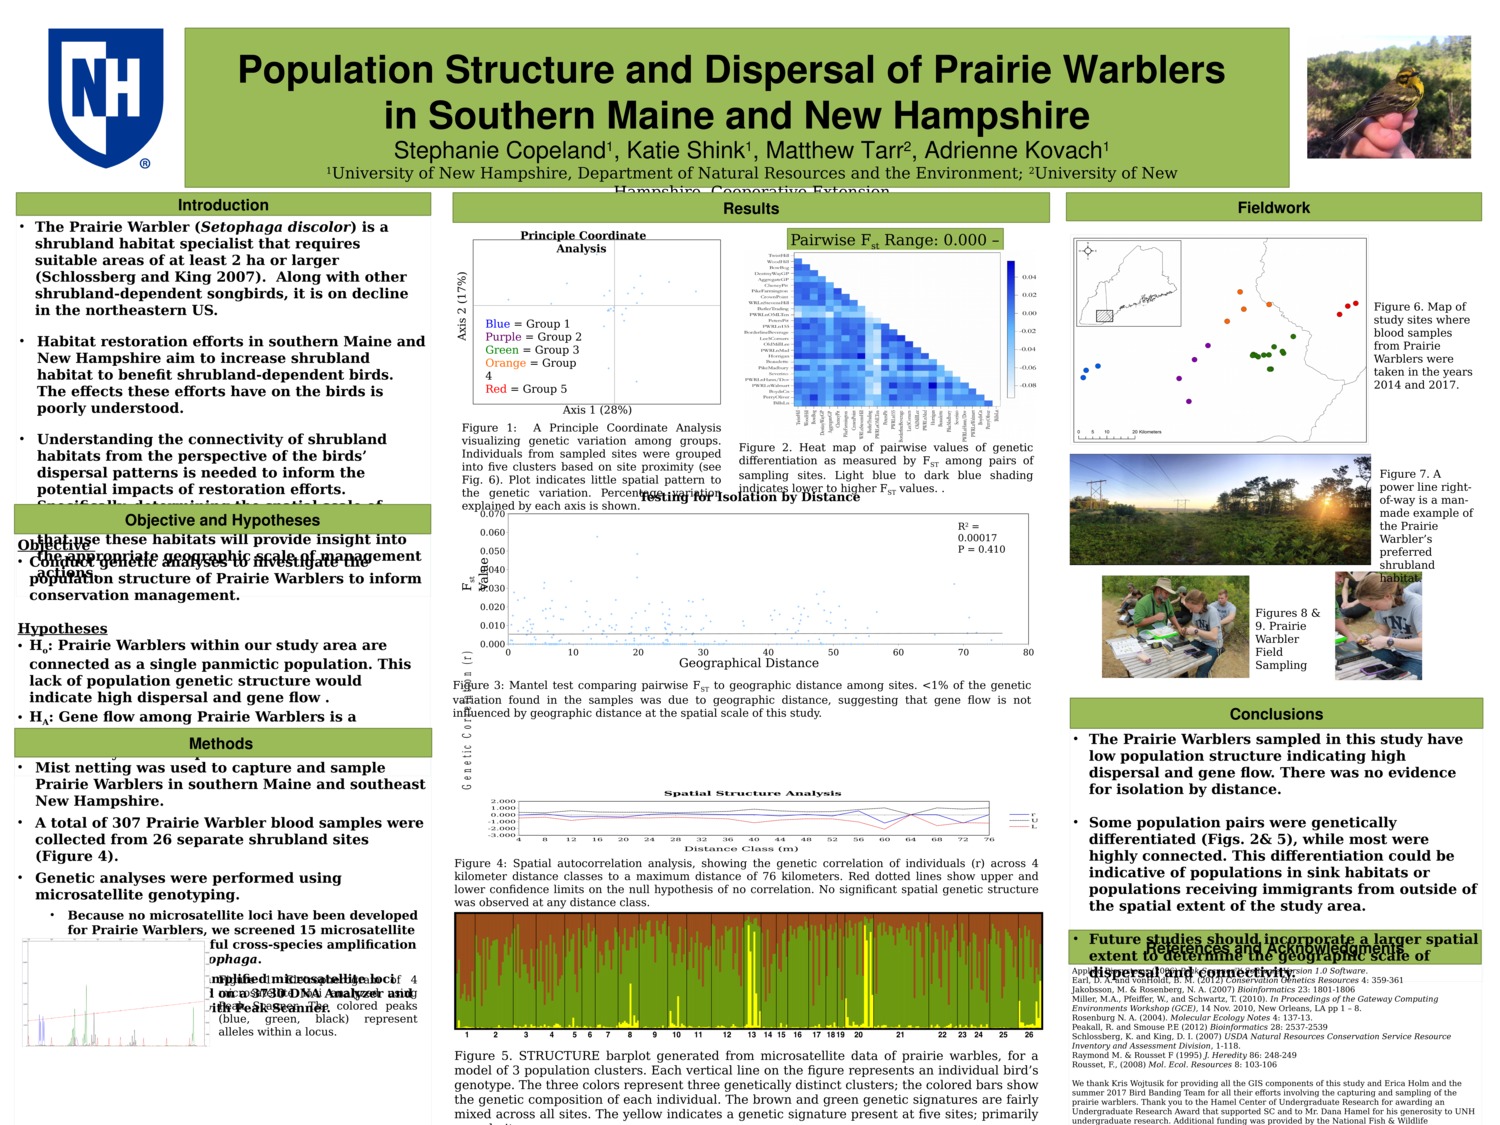 Population Structure And Dispersal Of Prairie Warblers In Southern Maine And New Hampshire by sjc2003